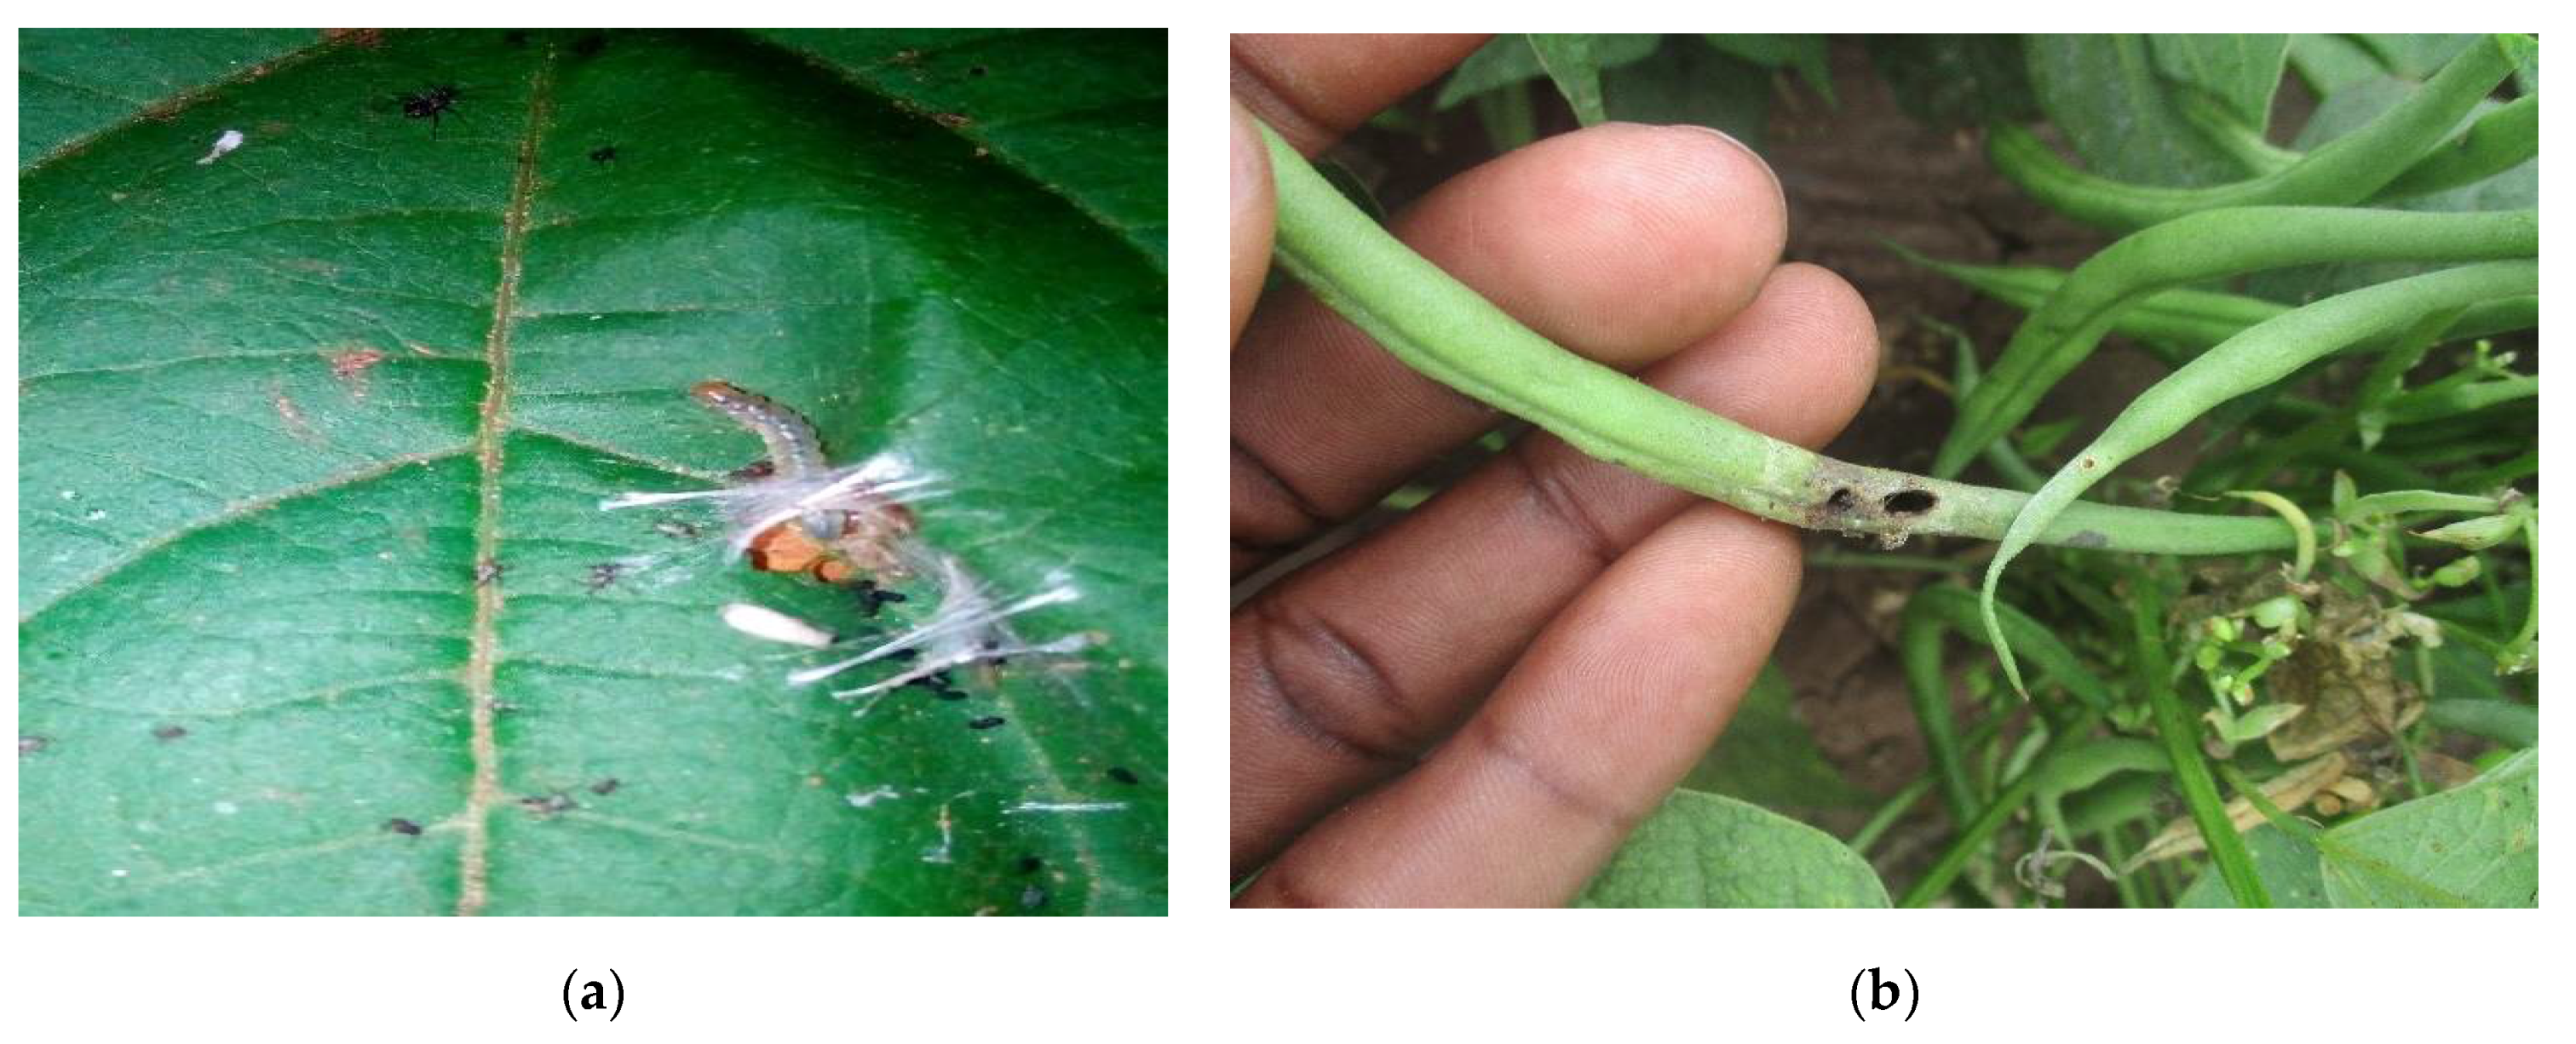 How To Control Thrips Using Biological Control - Dragonfli